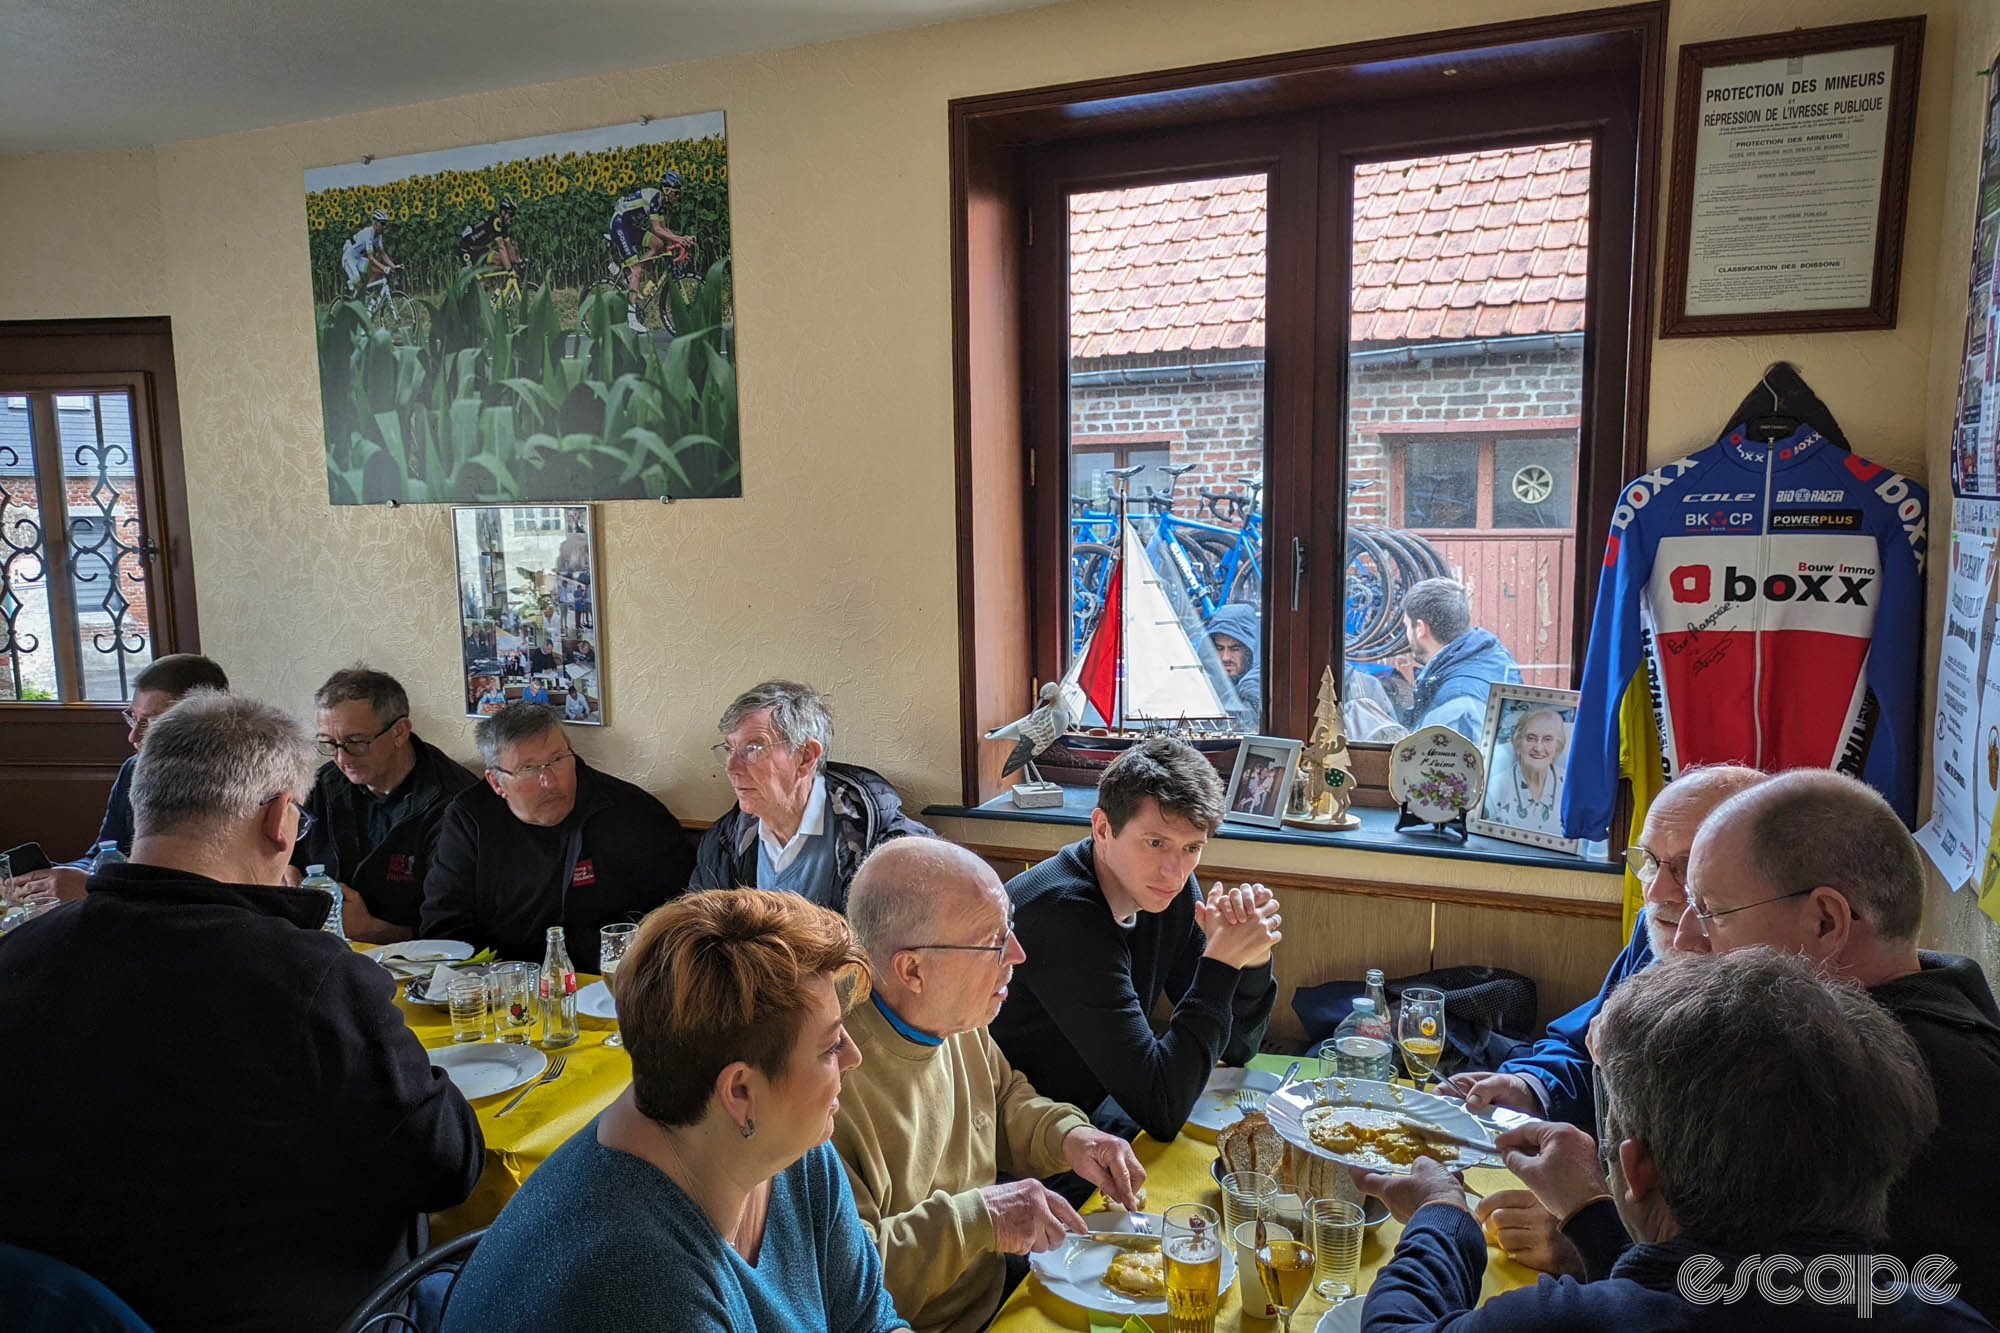 Les Amis de Paris-Roubaix gather at Chez Francoise for omelettes before a course recon. It's a classically French restaurant with bright yellow tablecloths, cycling paraphernalia, and French people of mostly middle and late-middle age gathered at tables.